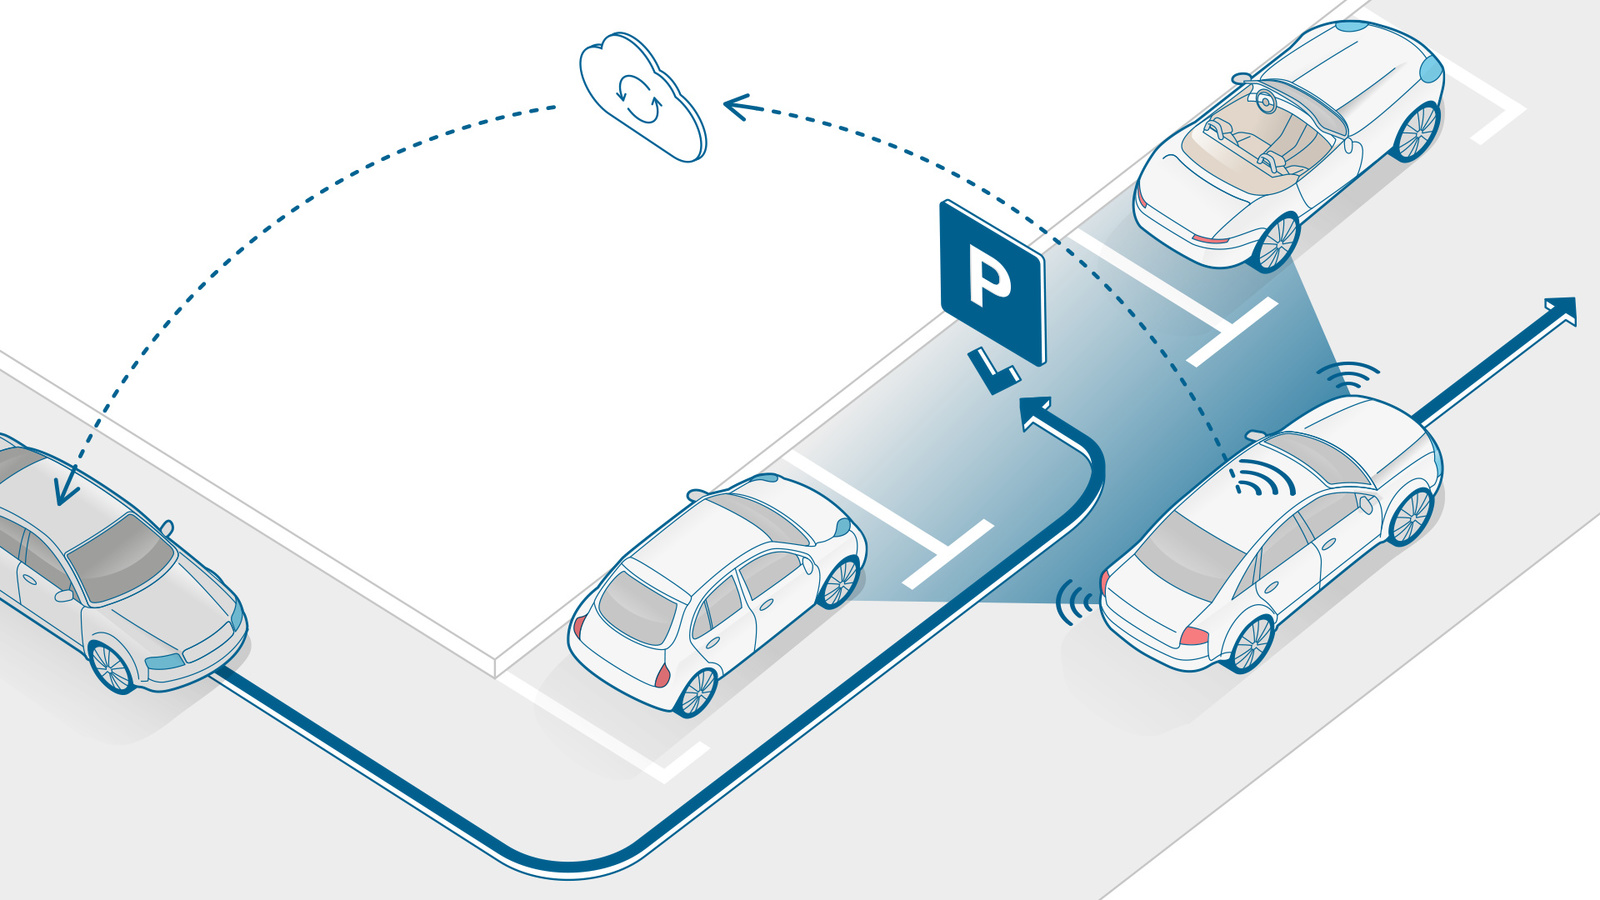 Bosch is driving new mobility forward